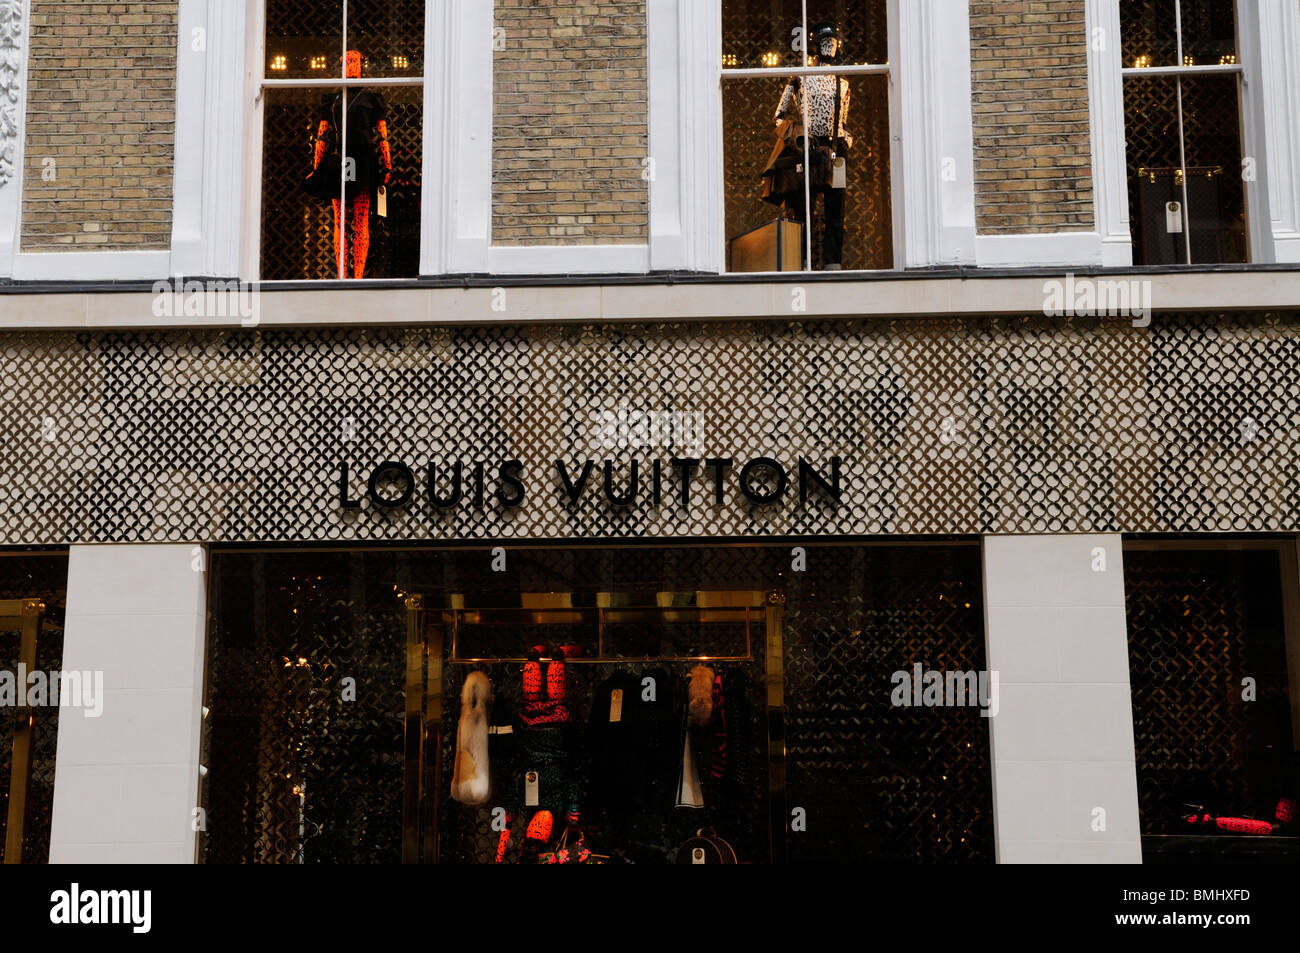 Louis Vuitton store front in London Stock Photo - Alamy